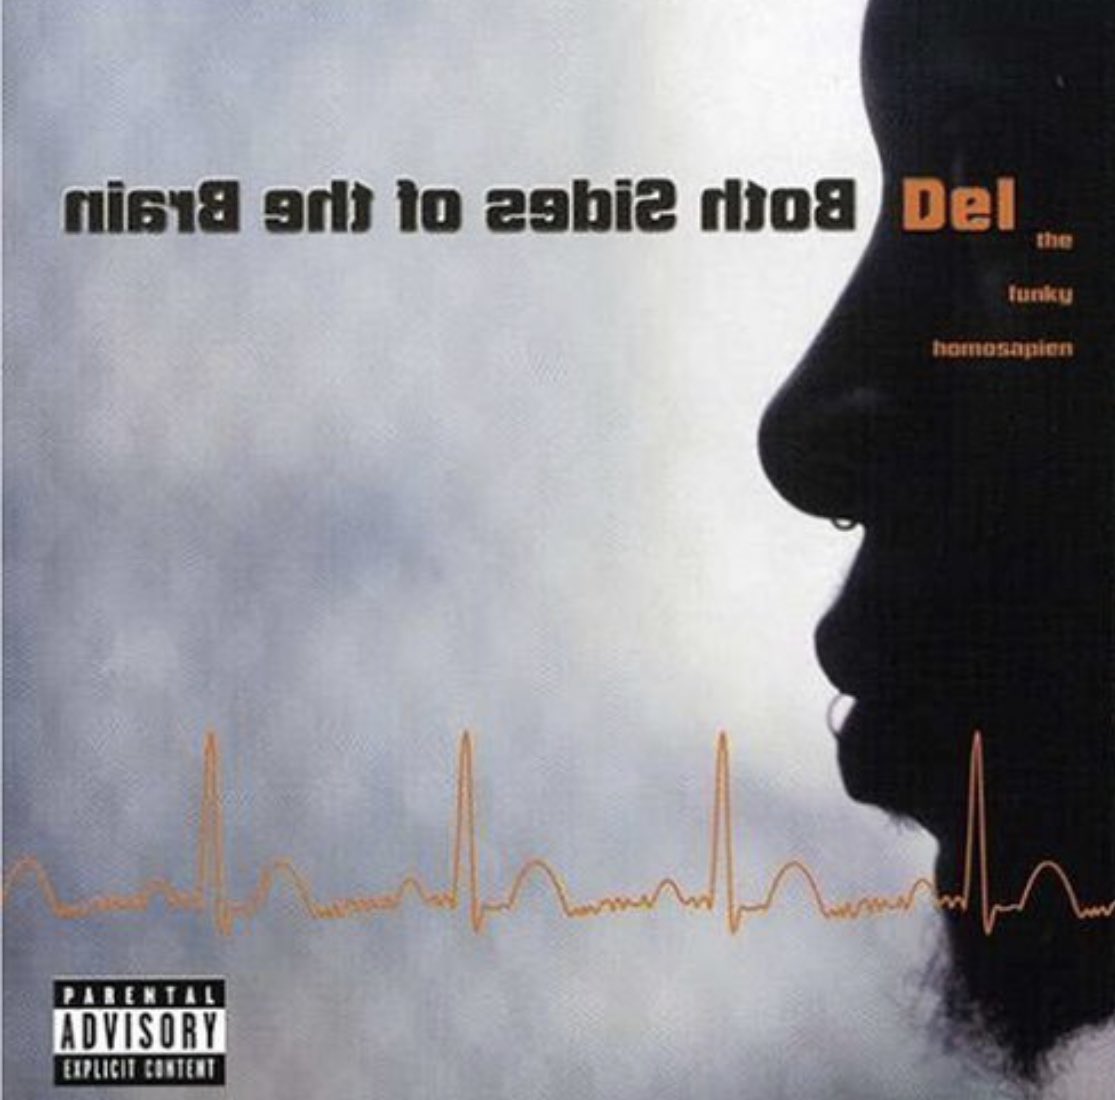 Rap History: Del the Funky Homosapien (@DelHIERO) - ‘Both Sides of the Brain’, released April 11, 2000.